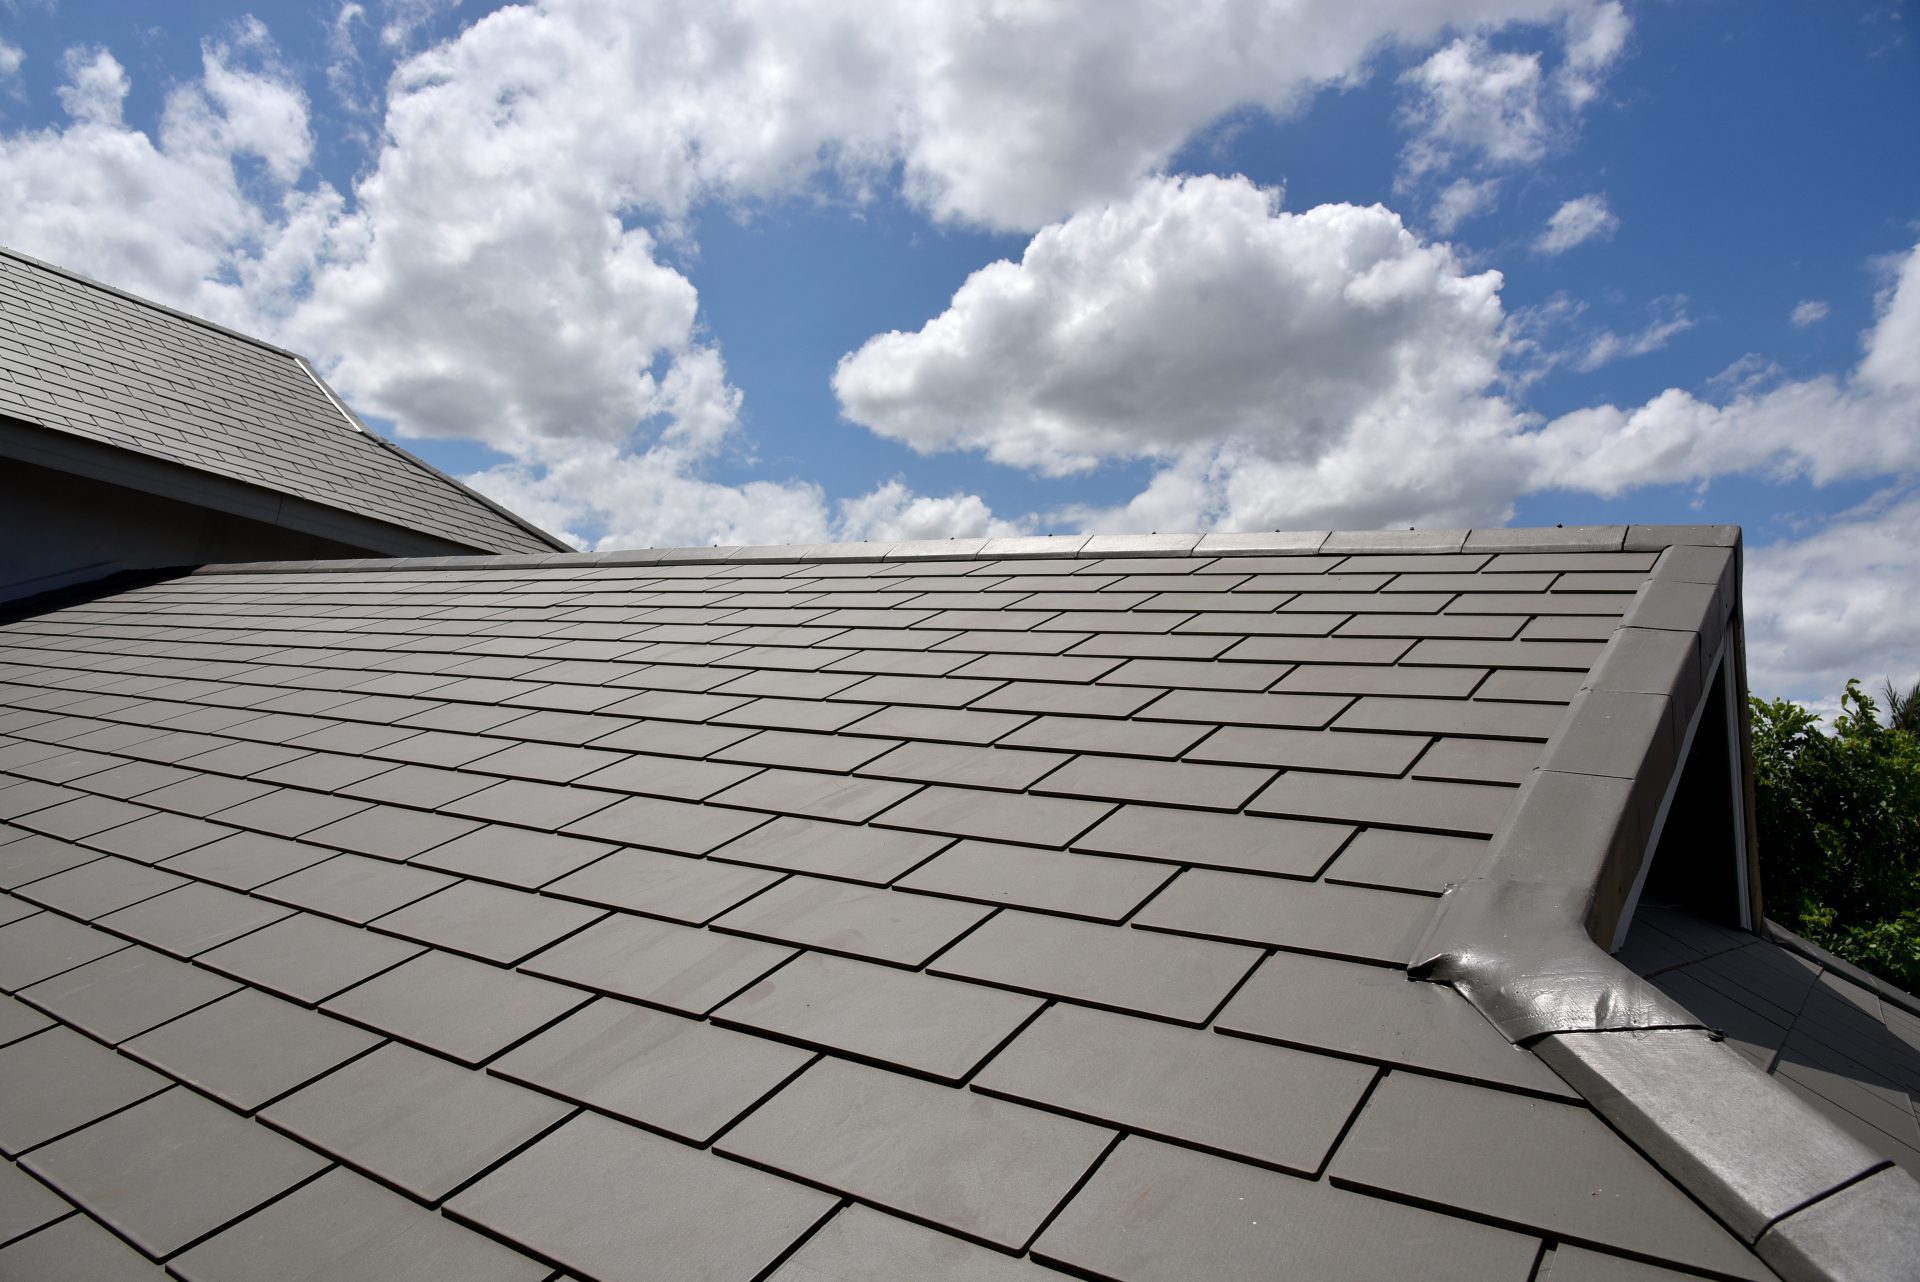 Image of a Roof of a house with background of Sky image in aberdeen